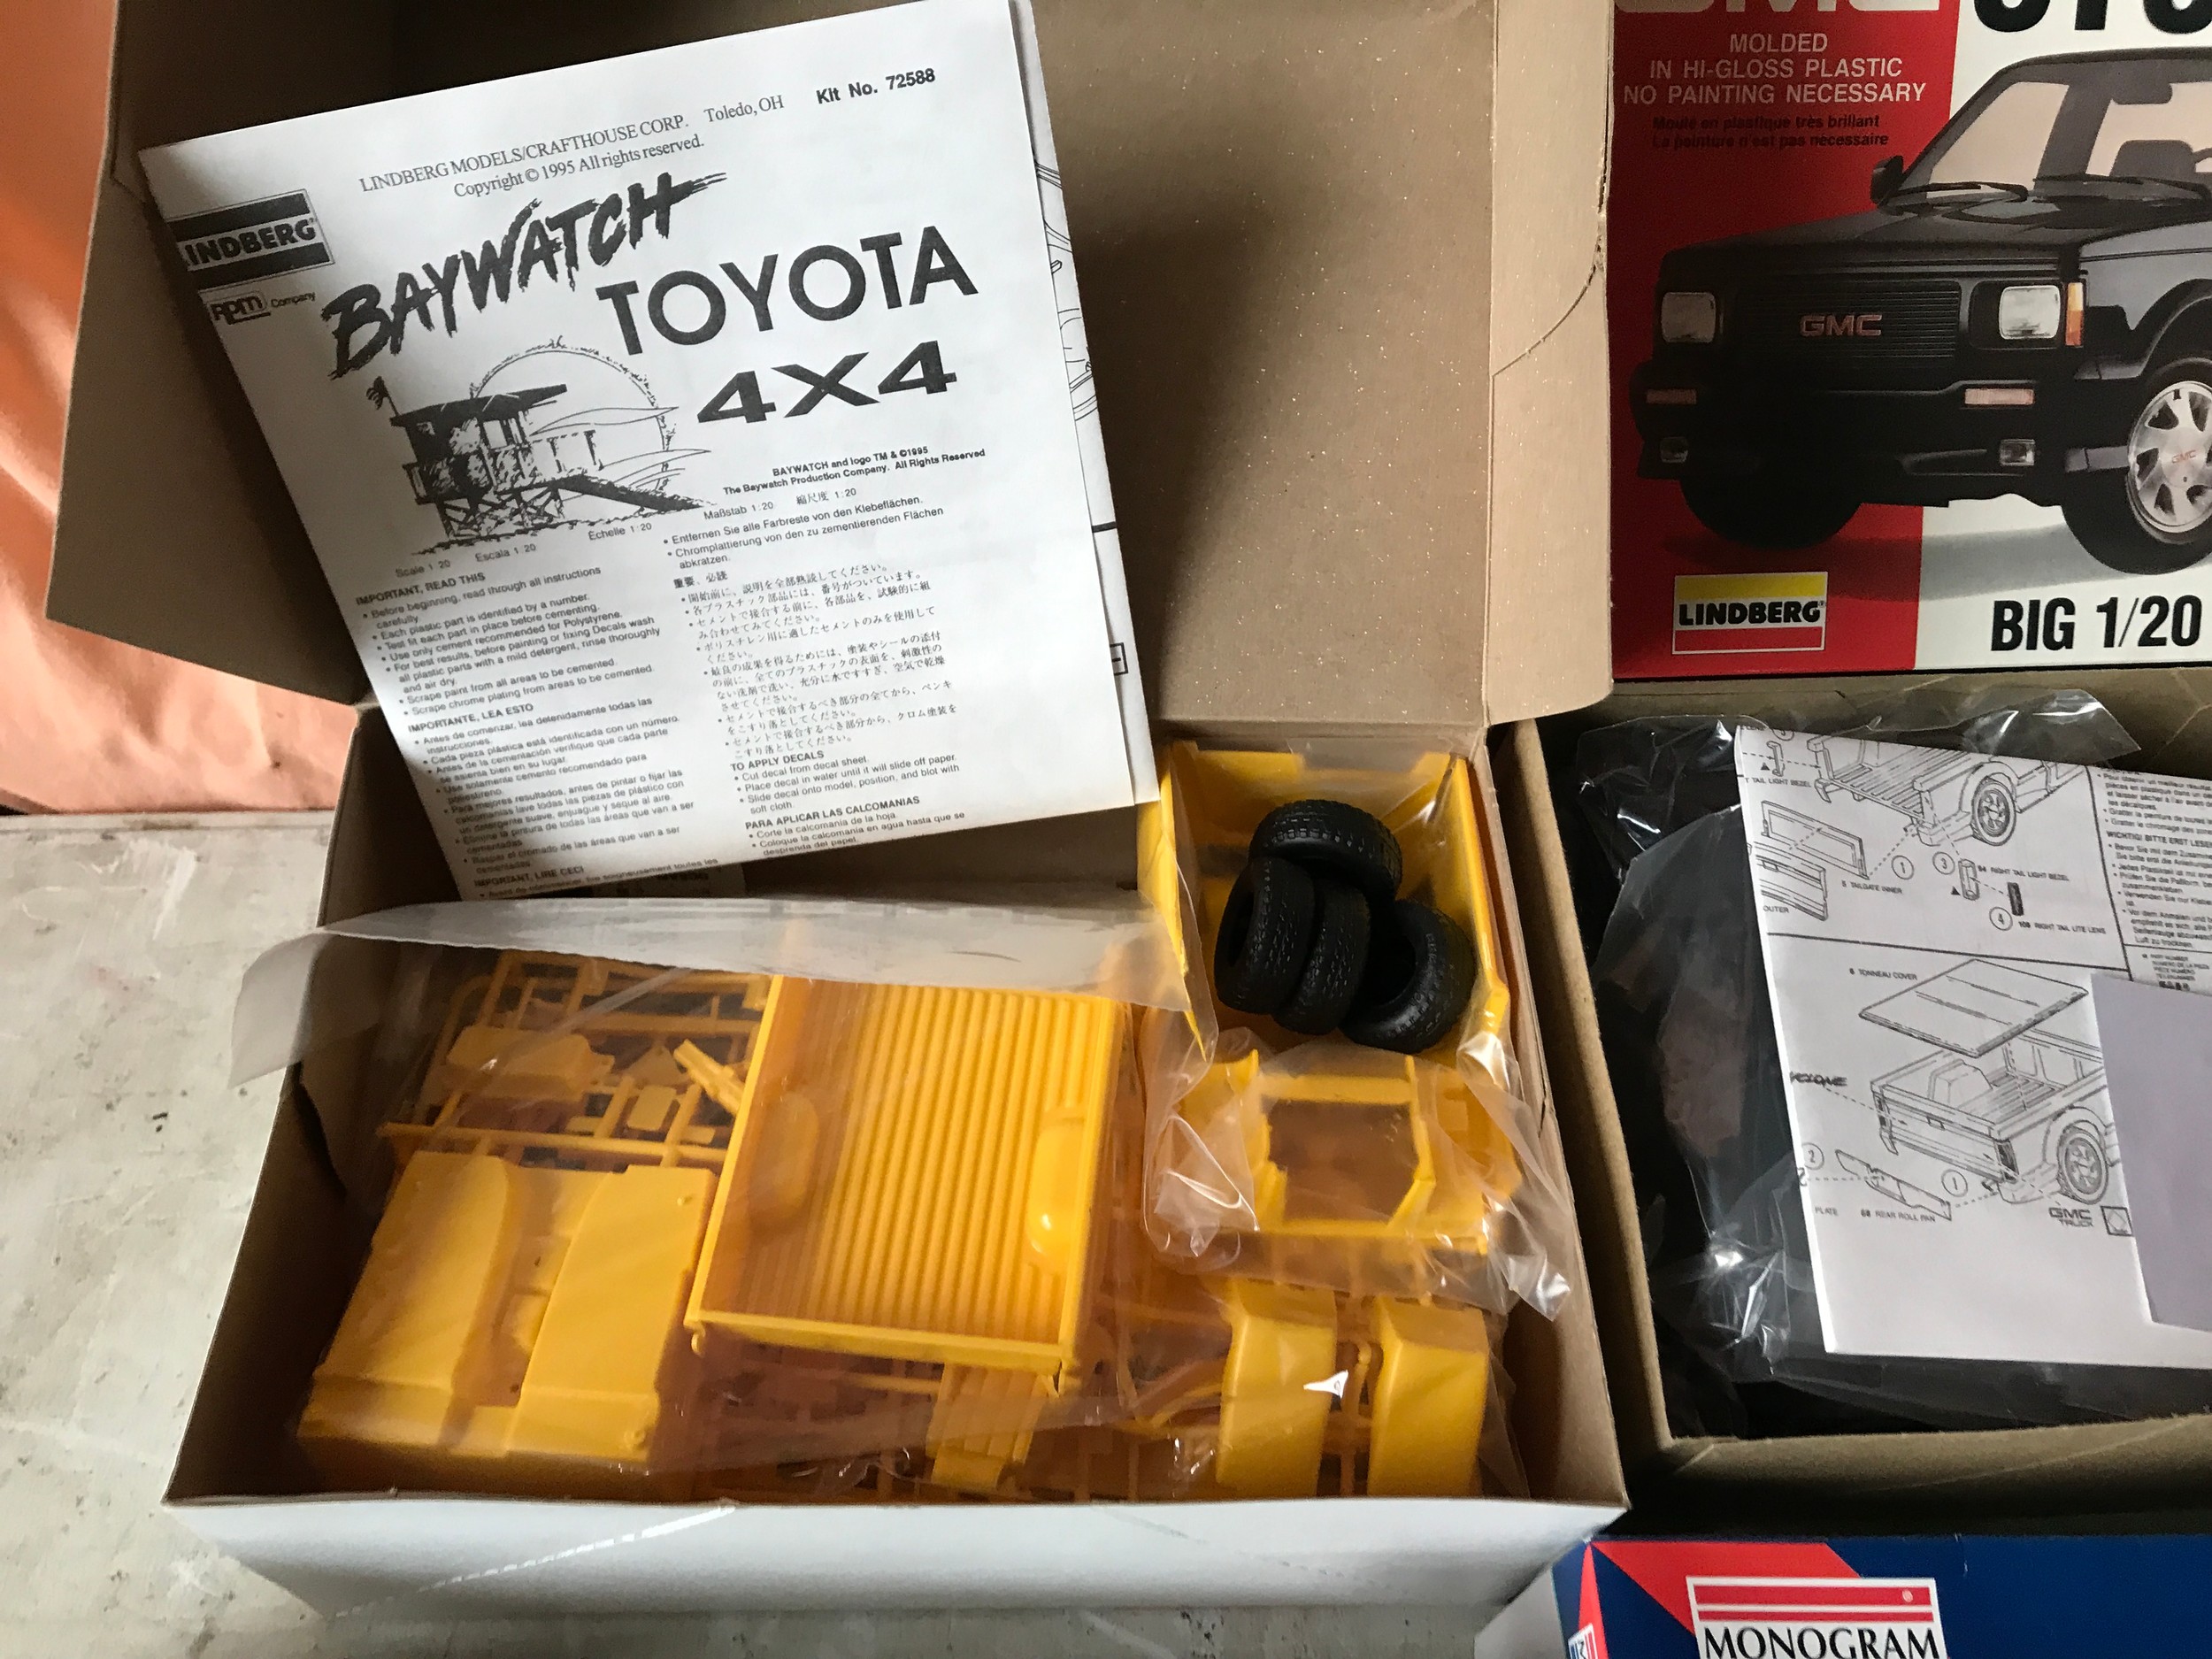 Model kit vehicles selection. 1-20 scale, various makes, Lindberg Baywatch Toyota 4x4, GMC Syclone - Image 4 of 5